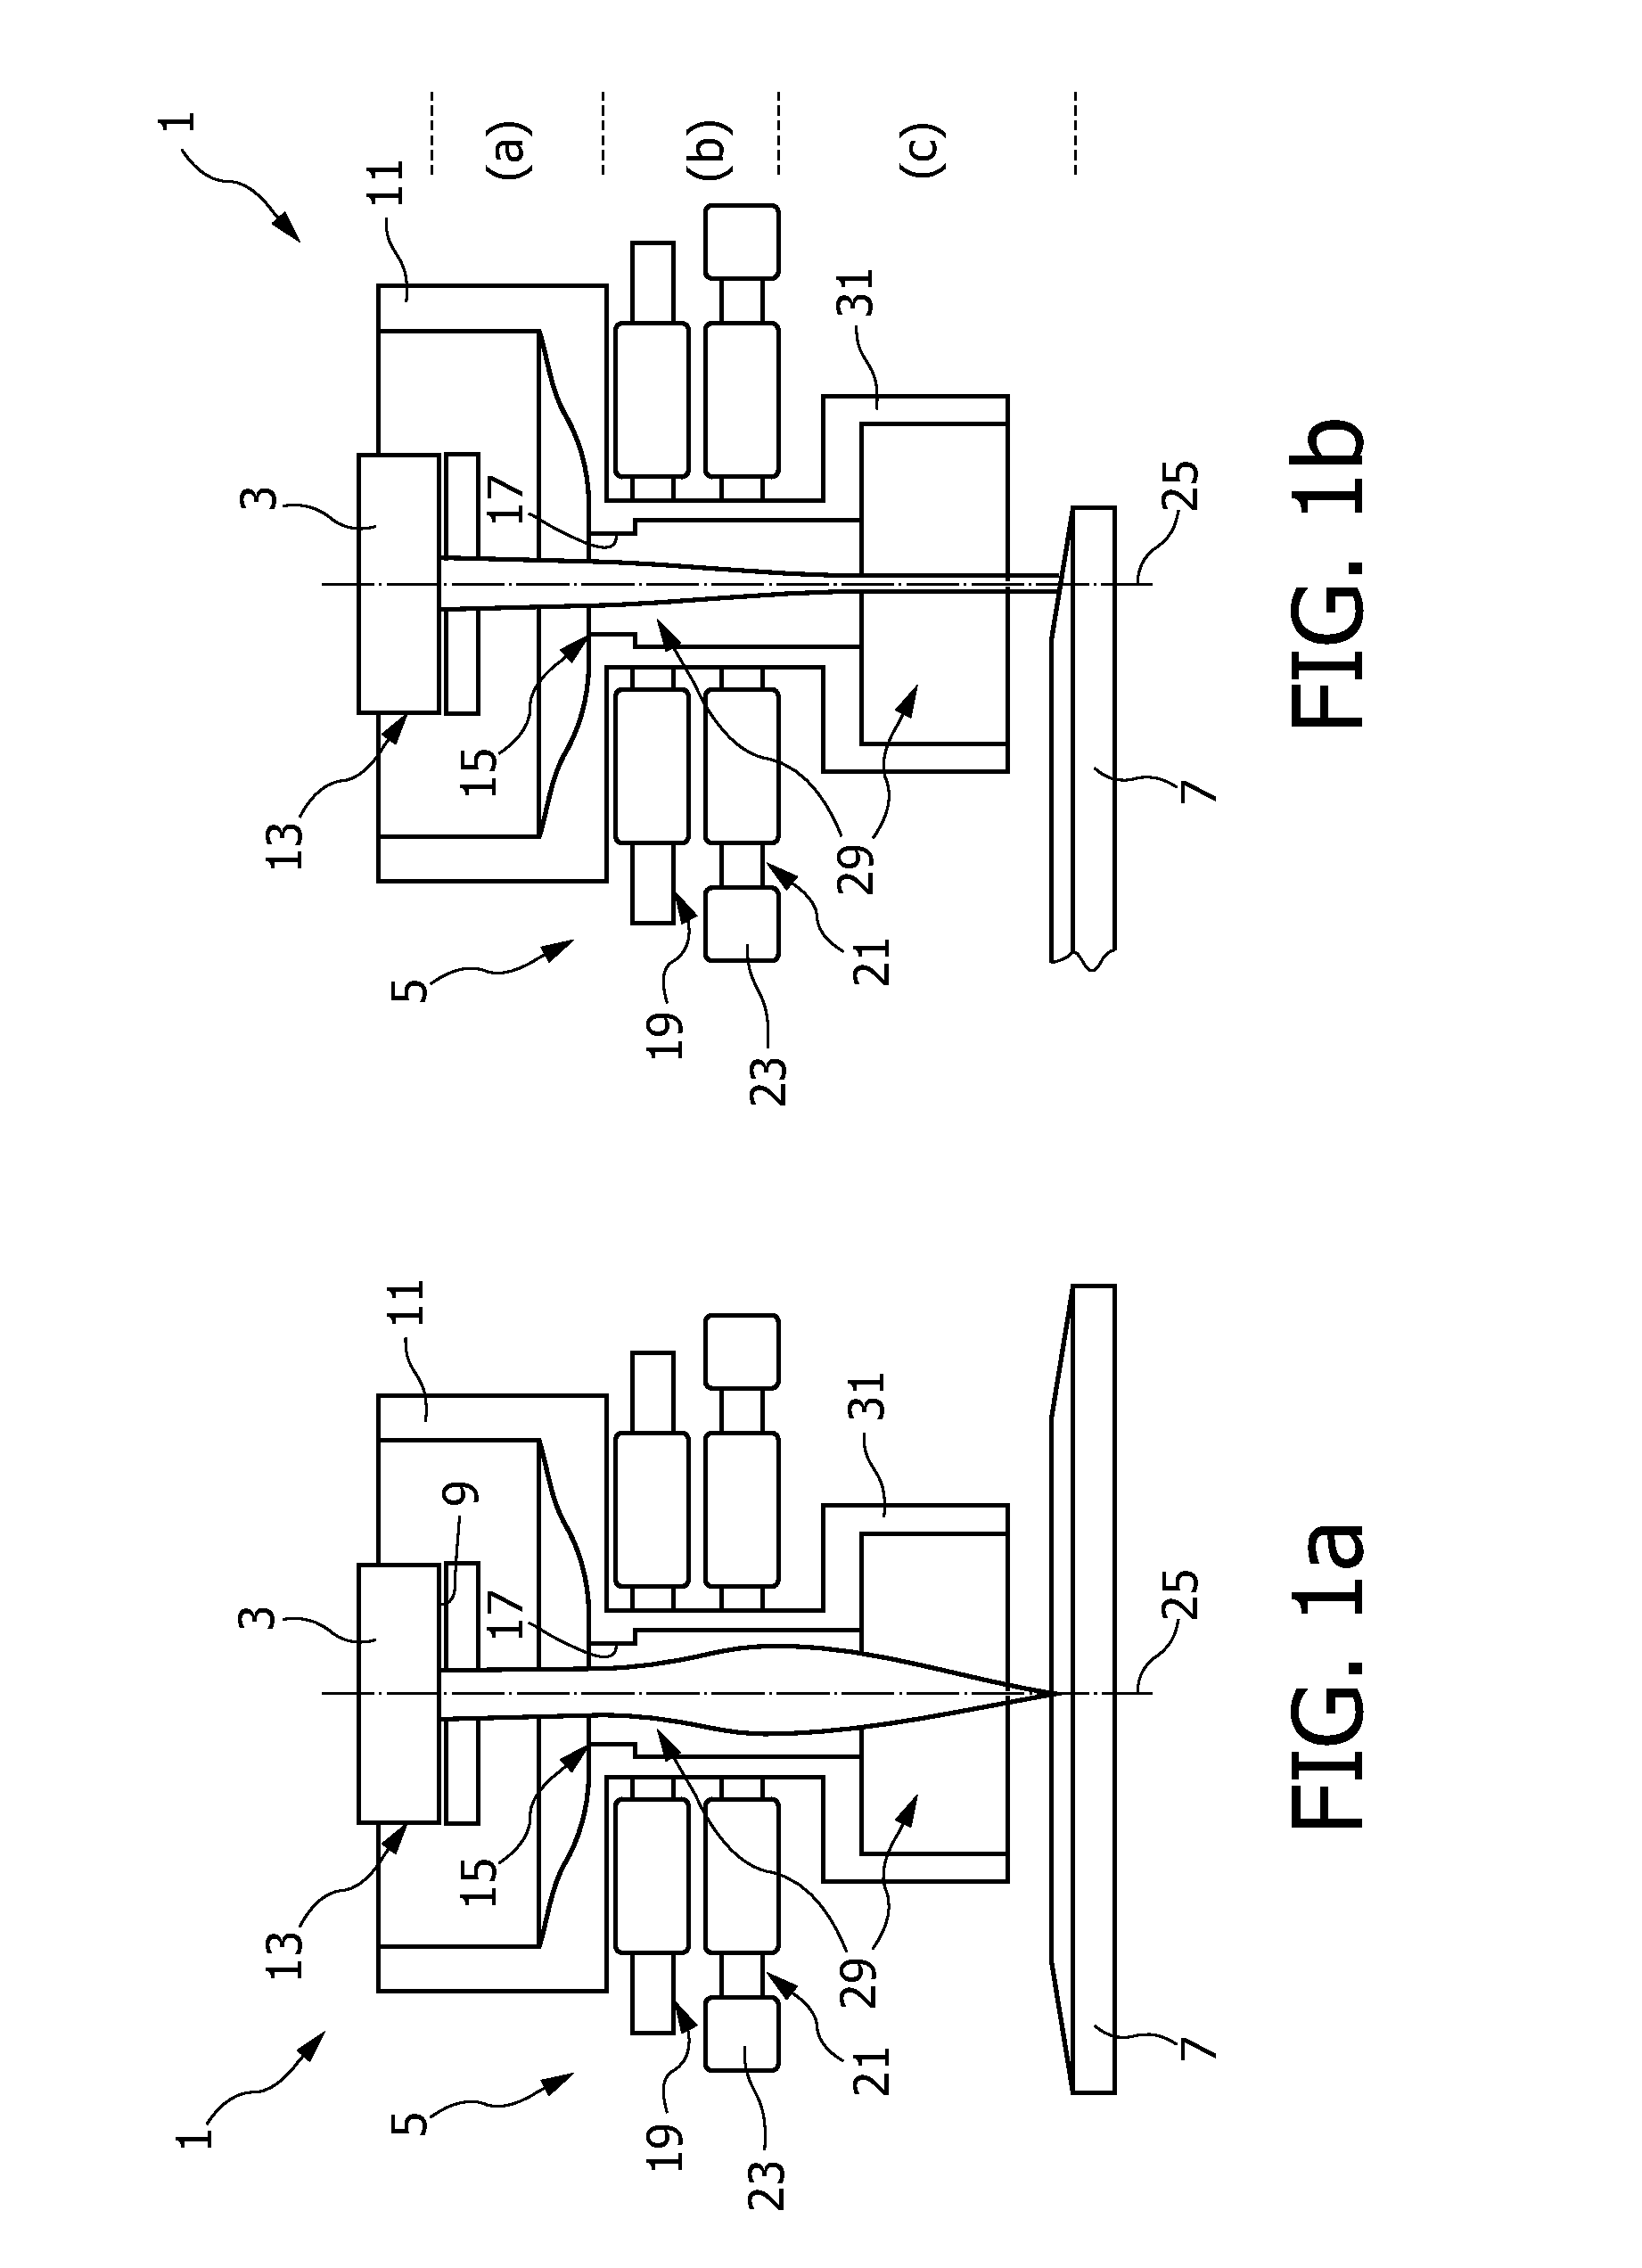 Electron optical apparatus, x-ray emitting device and method of producing an electron beam